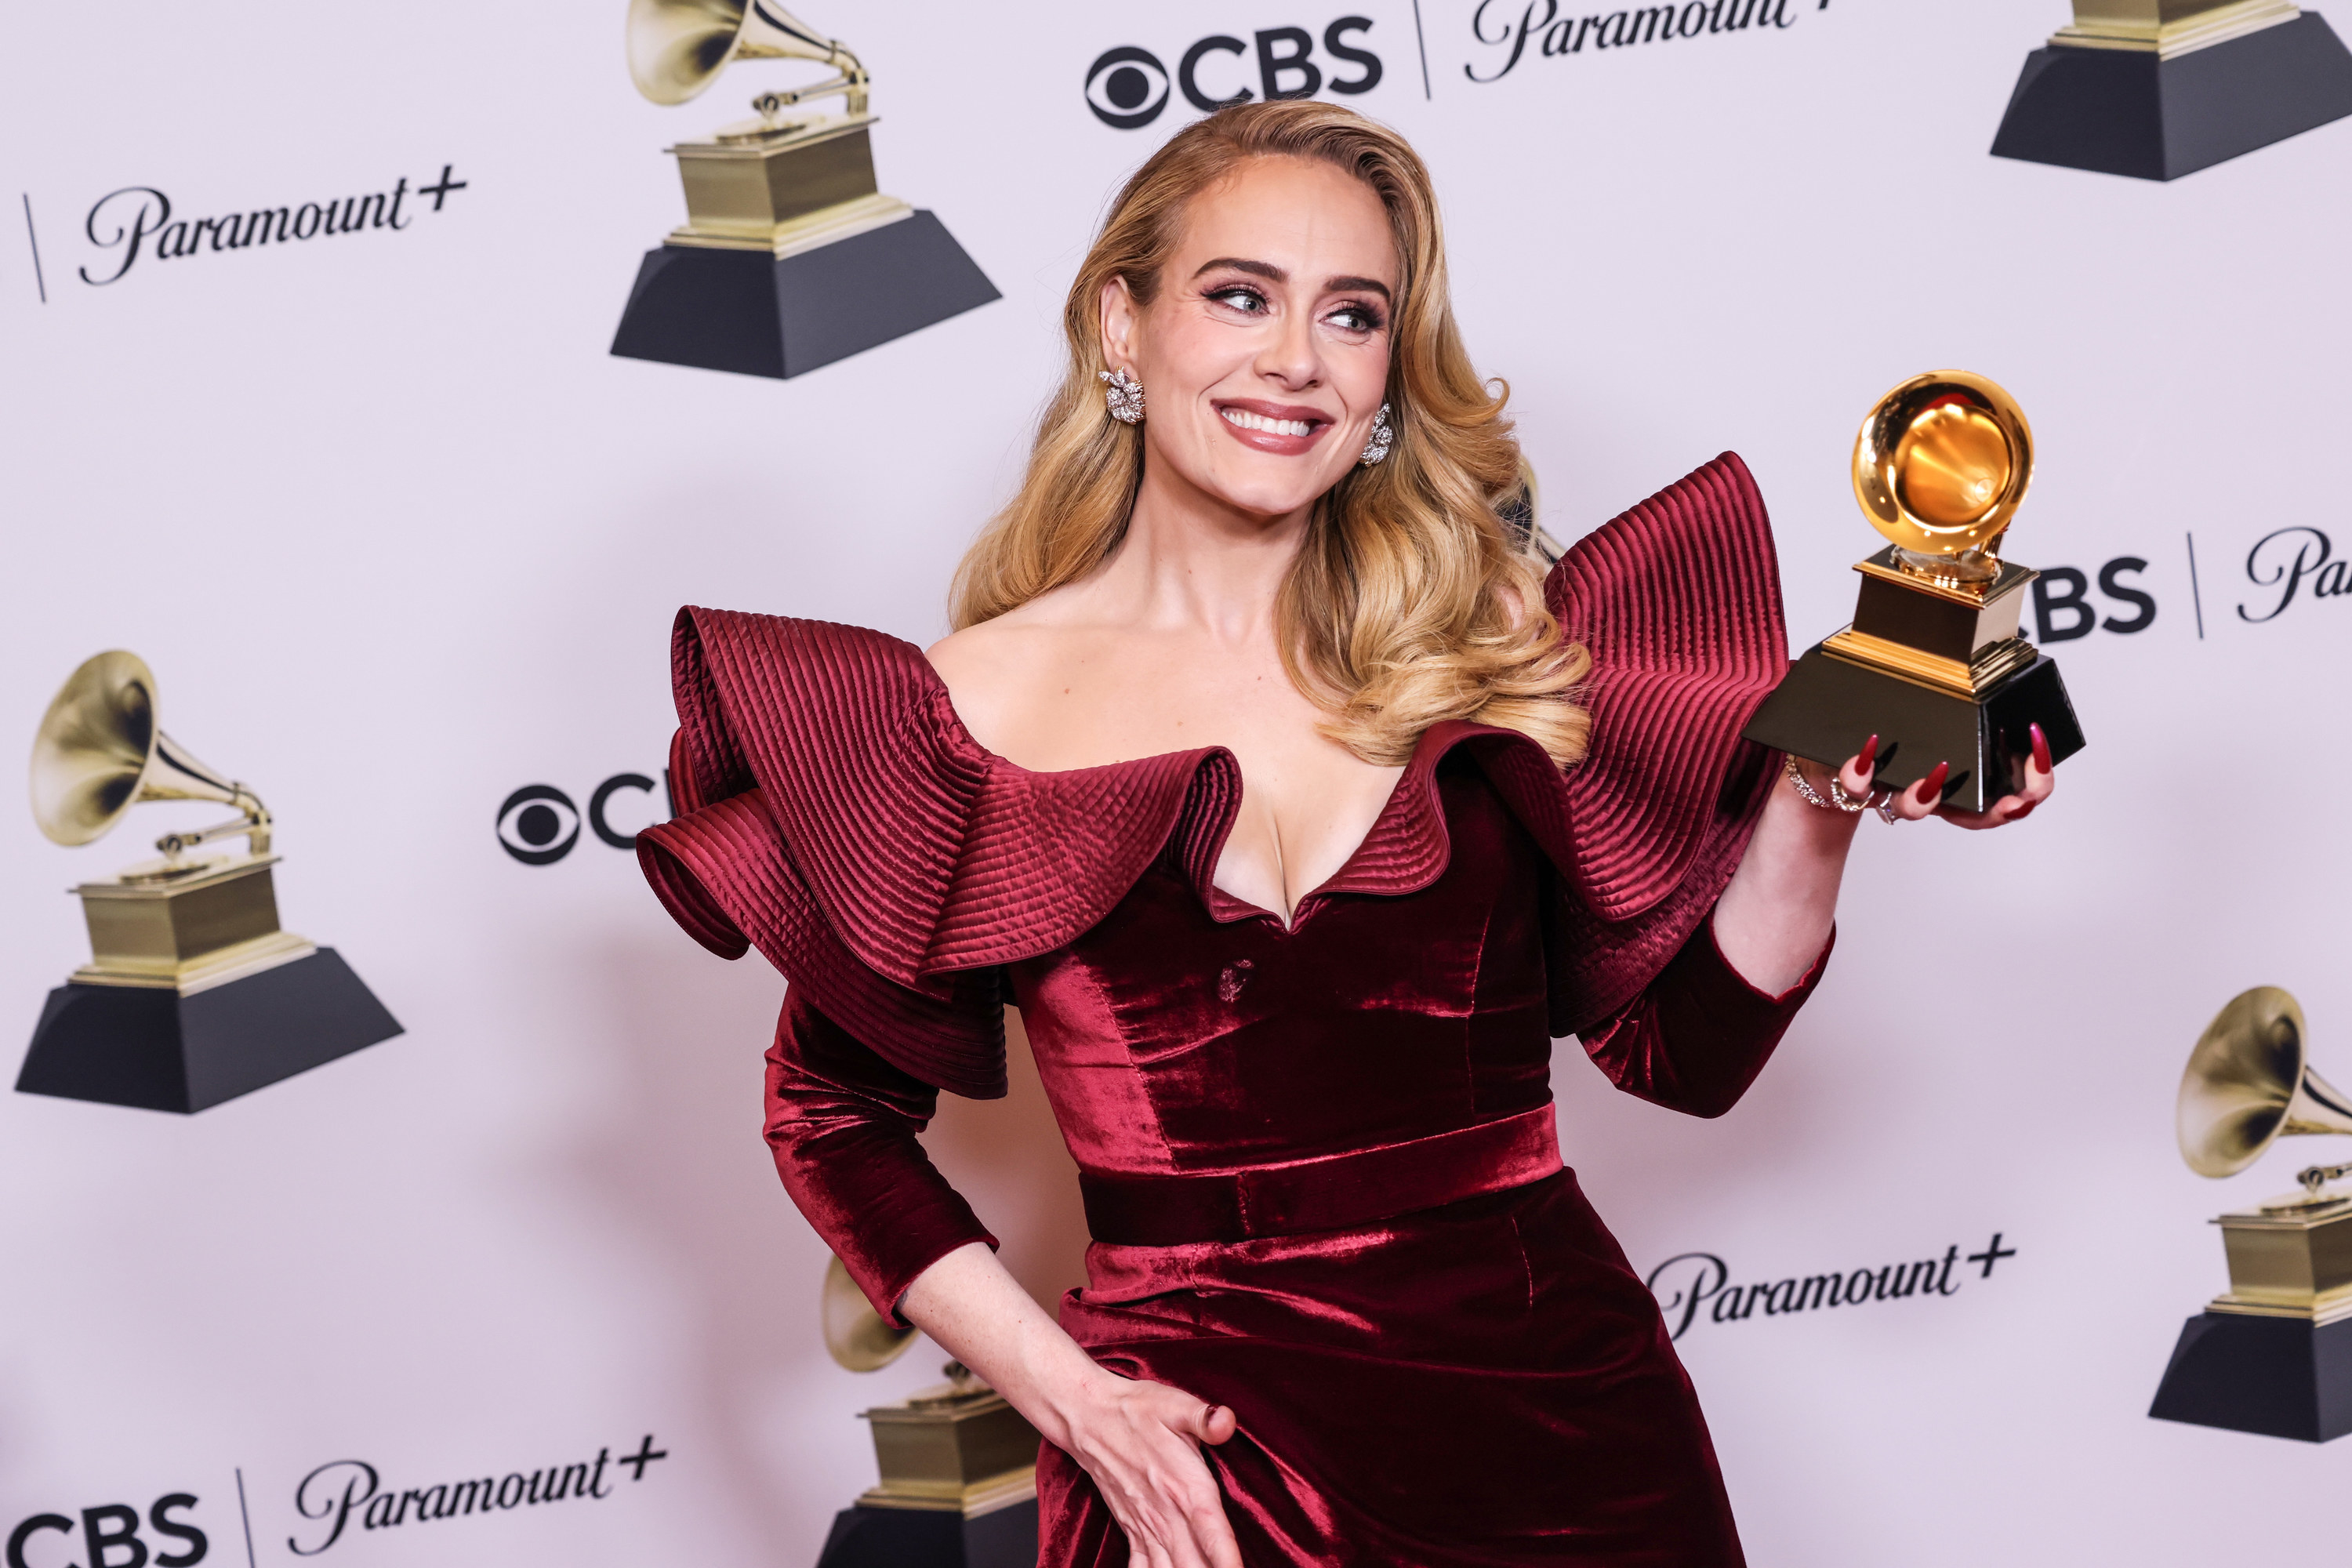 Adele holds up a Grammy trophy and smiles to the press after winning the award